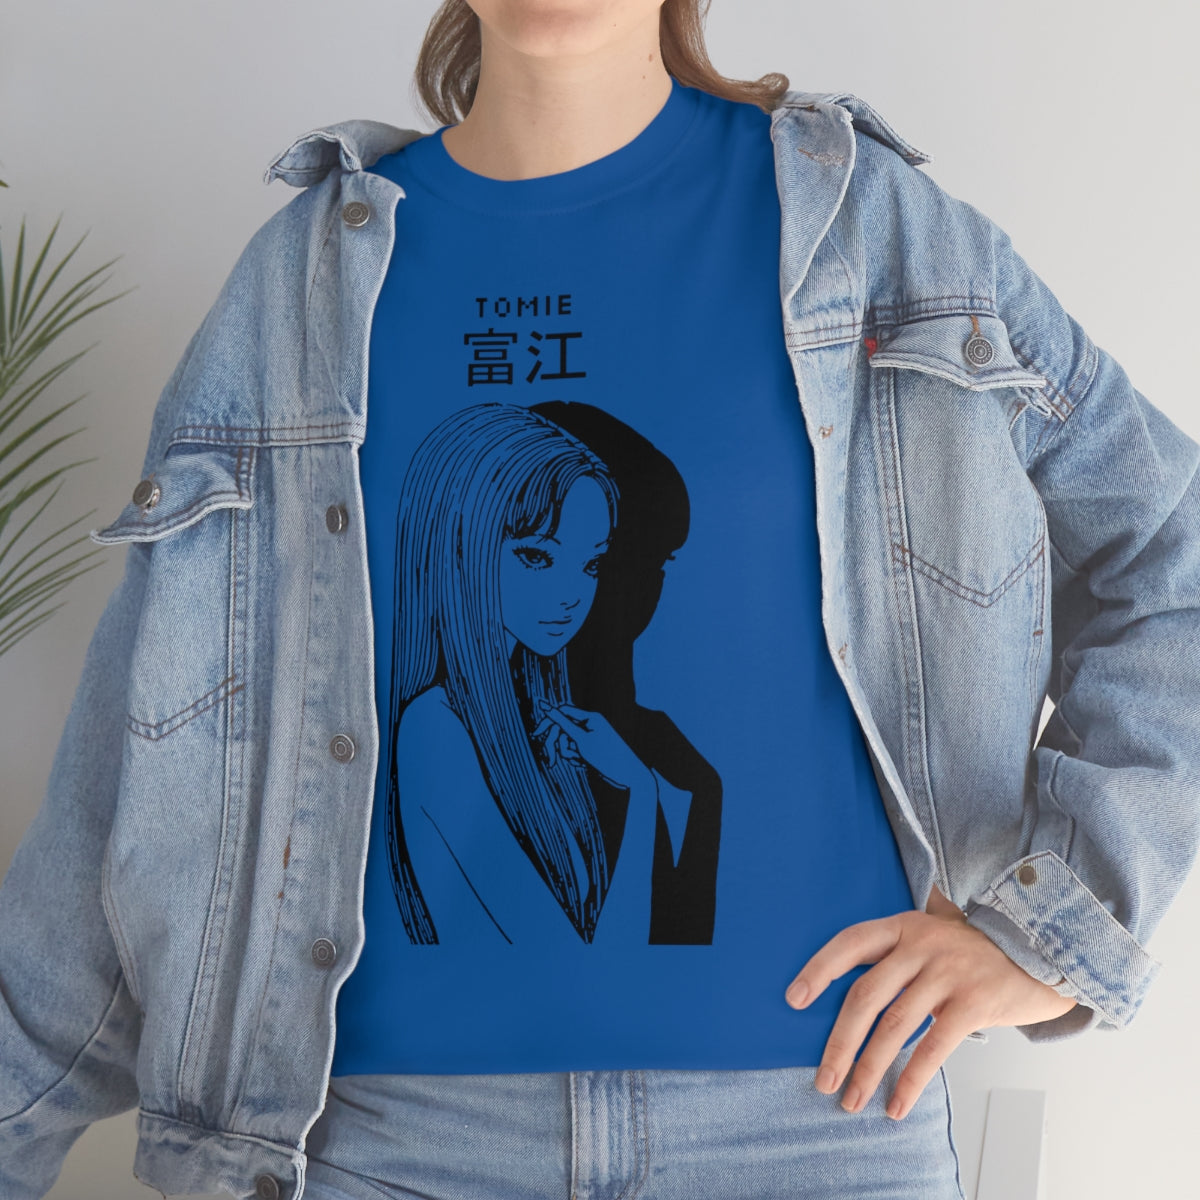 Tomie T-Shirt